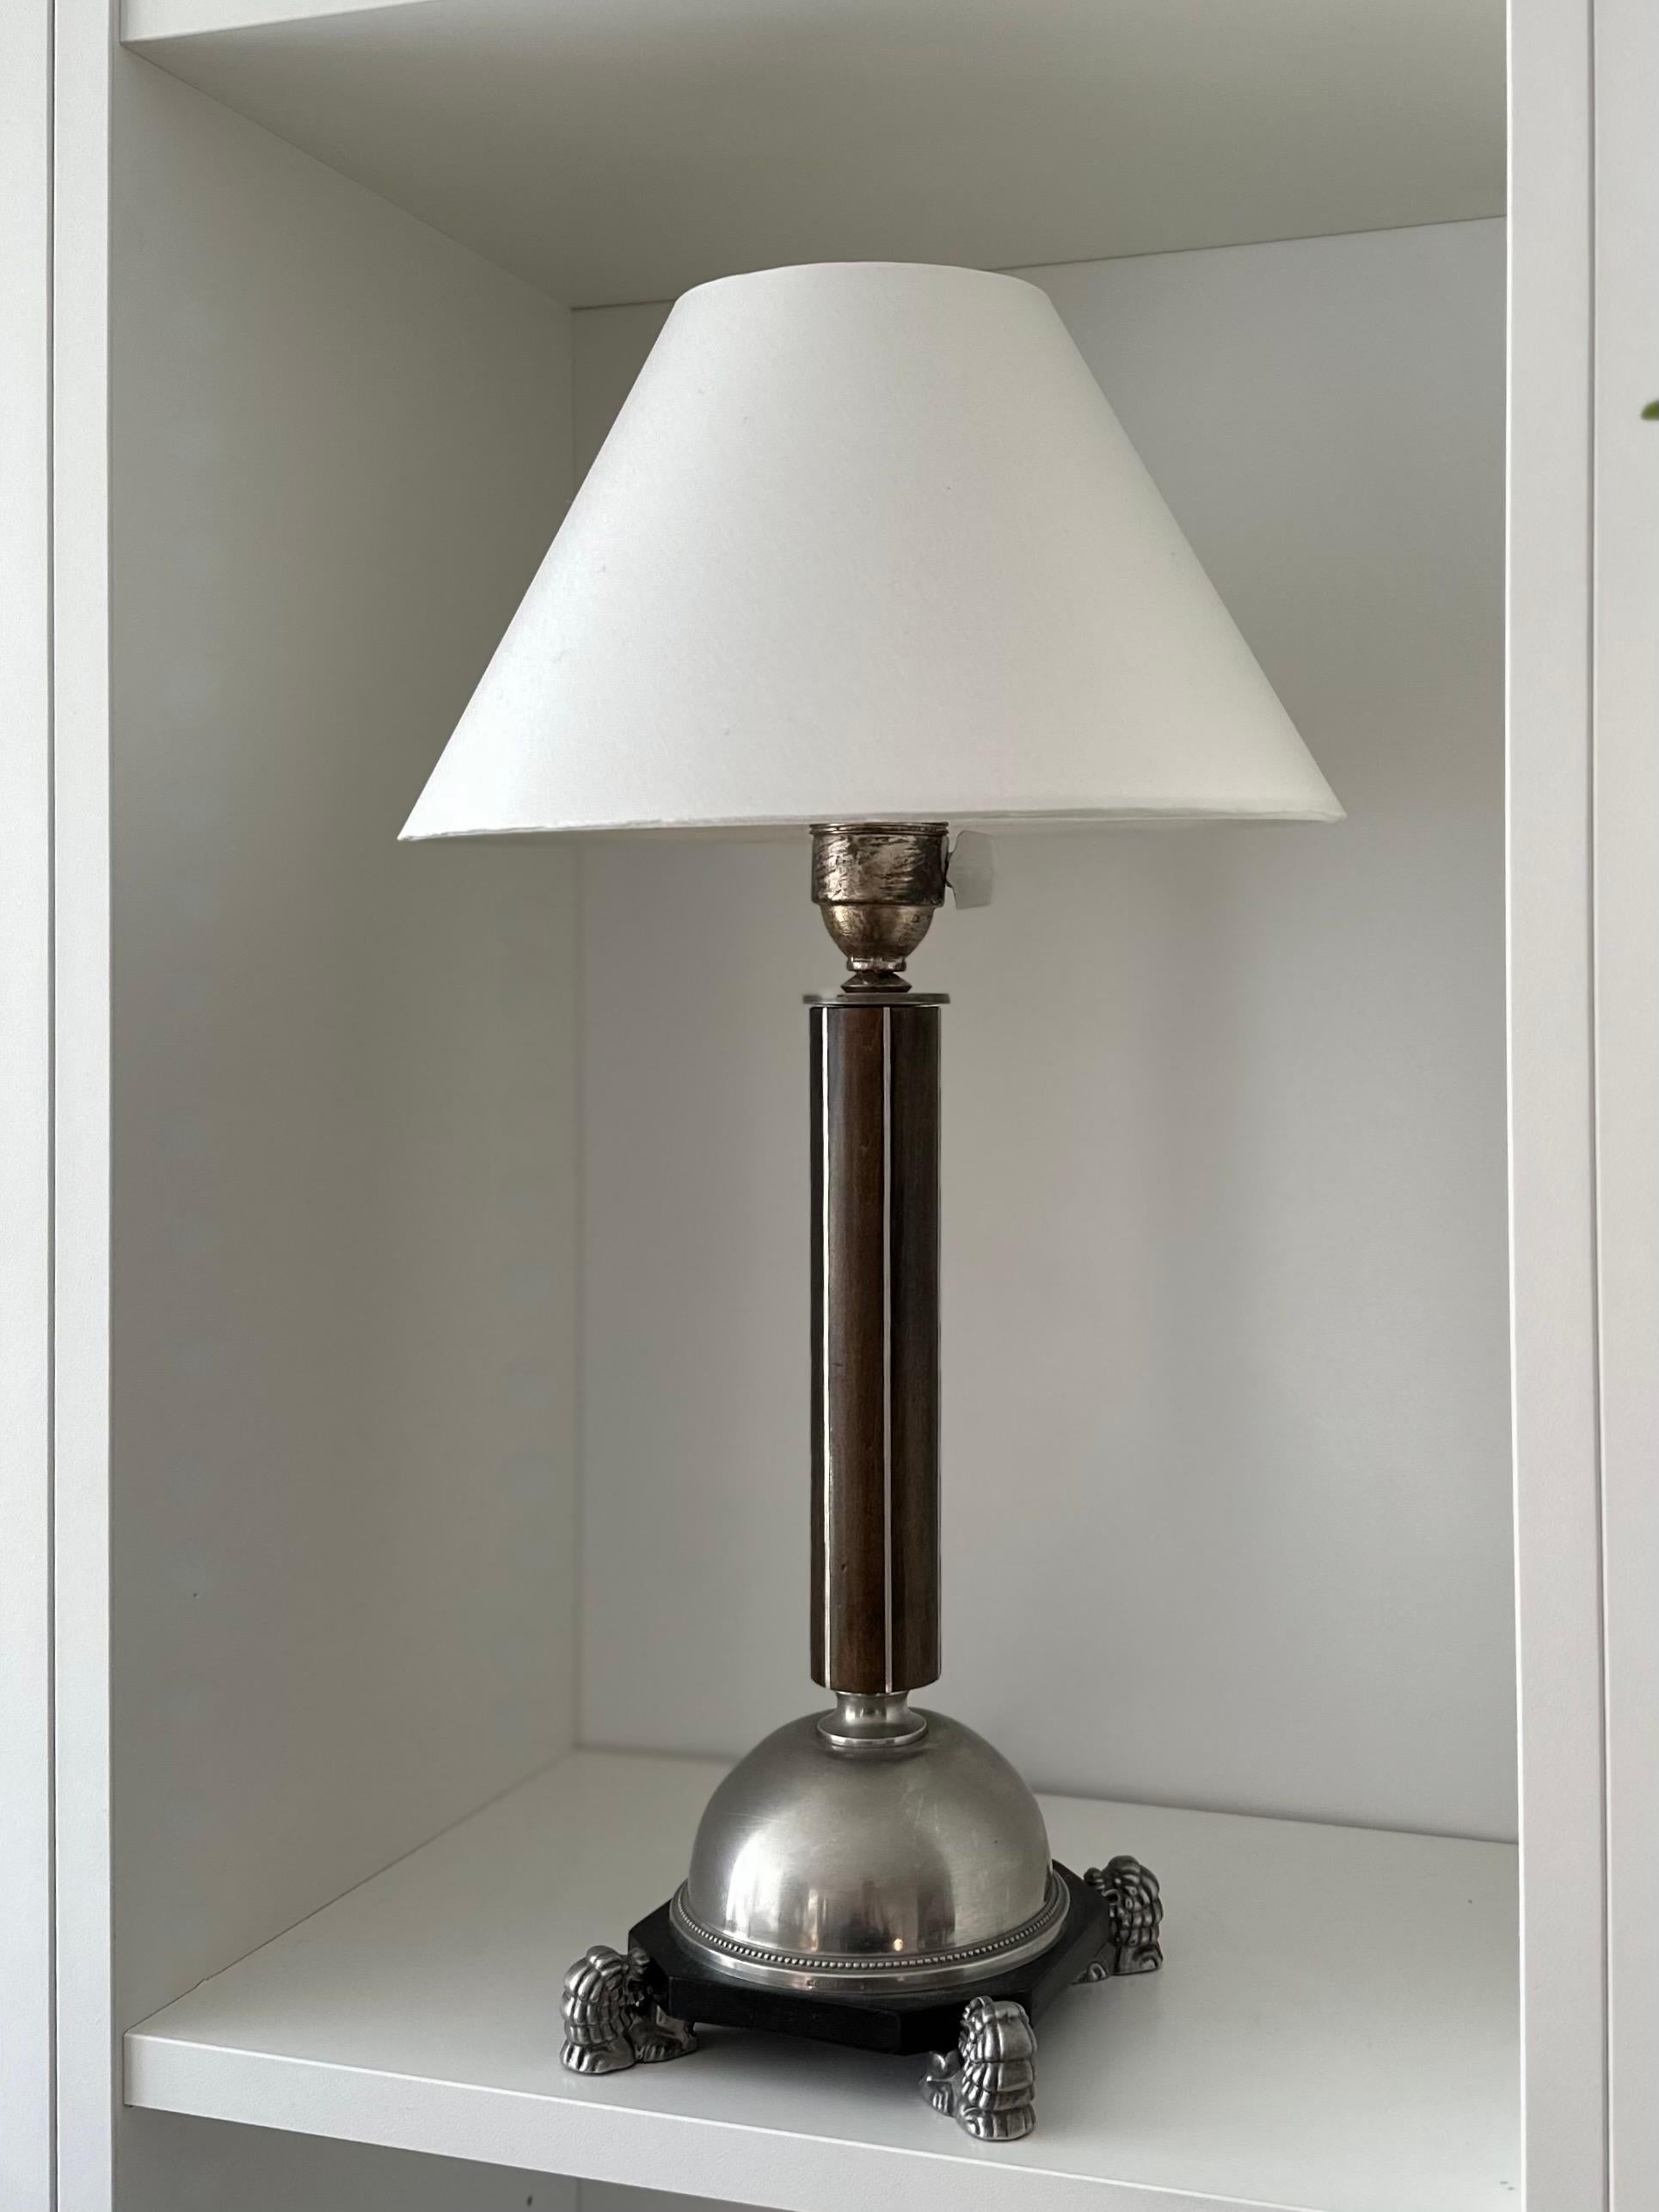 Swedish Grace Pewter Table Lamp Likely by Anna Petrus, C.G. Hallberg, 1930s 3